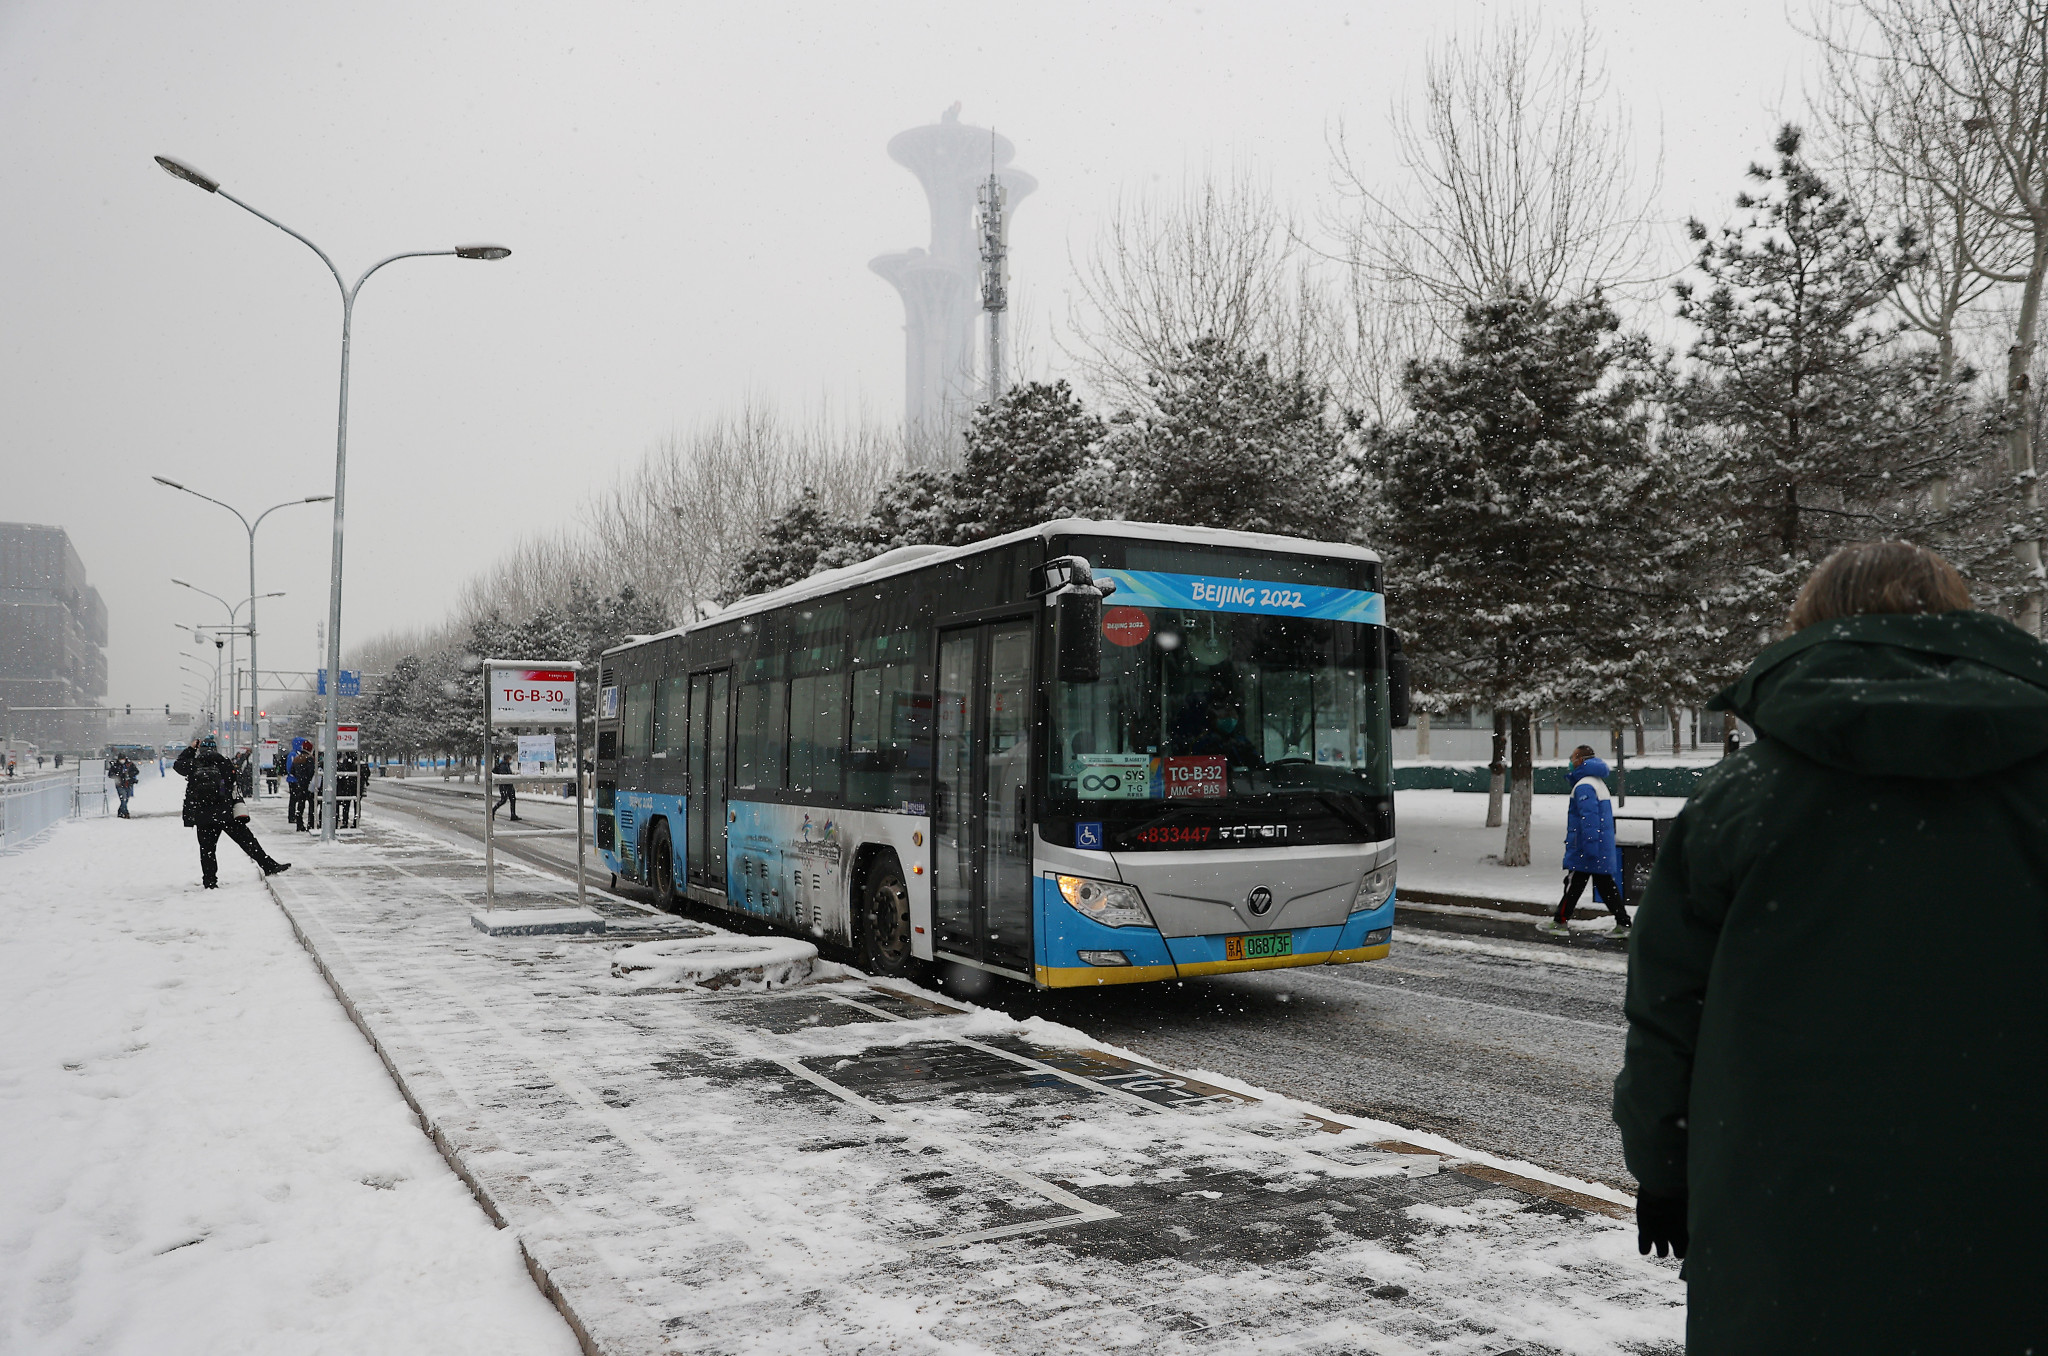 Zhangjiakou was served by 710 hydrogen-powered vehicles at Beijing 2022 in what was the largest-ever demonstration of such transport at an Olympic Games ©Getty Images